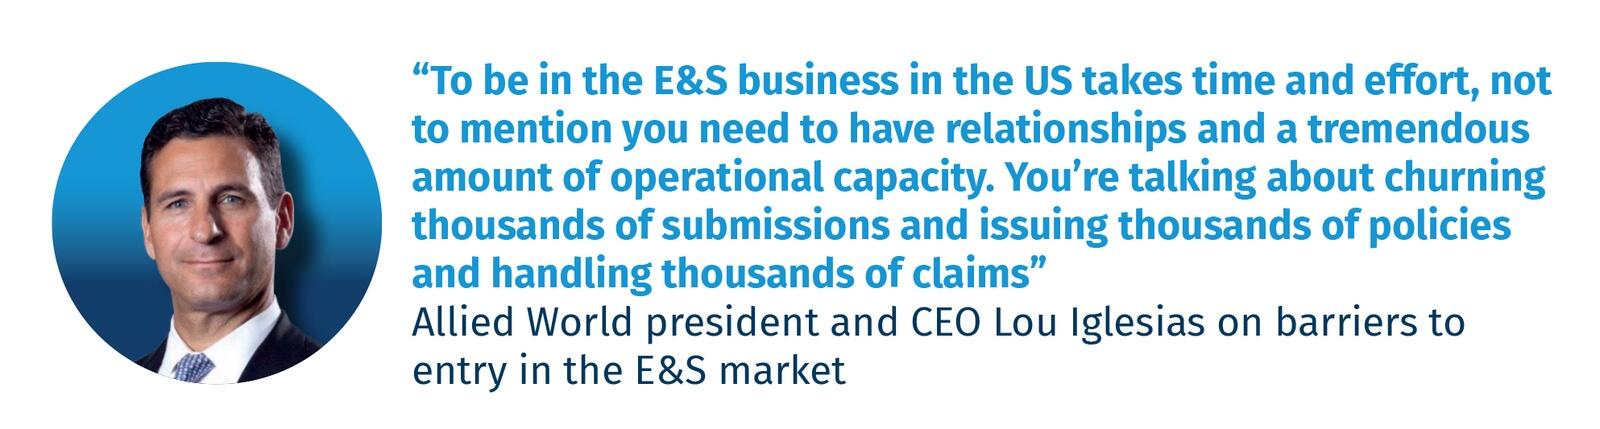 Allied World president and CEO Lou Iglesias on barriers to entry in the E&S market